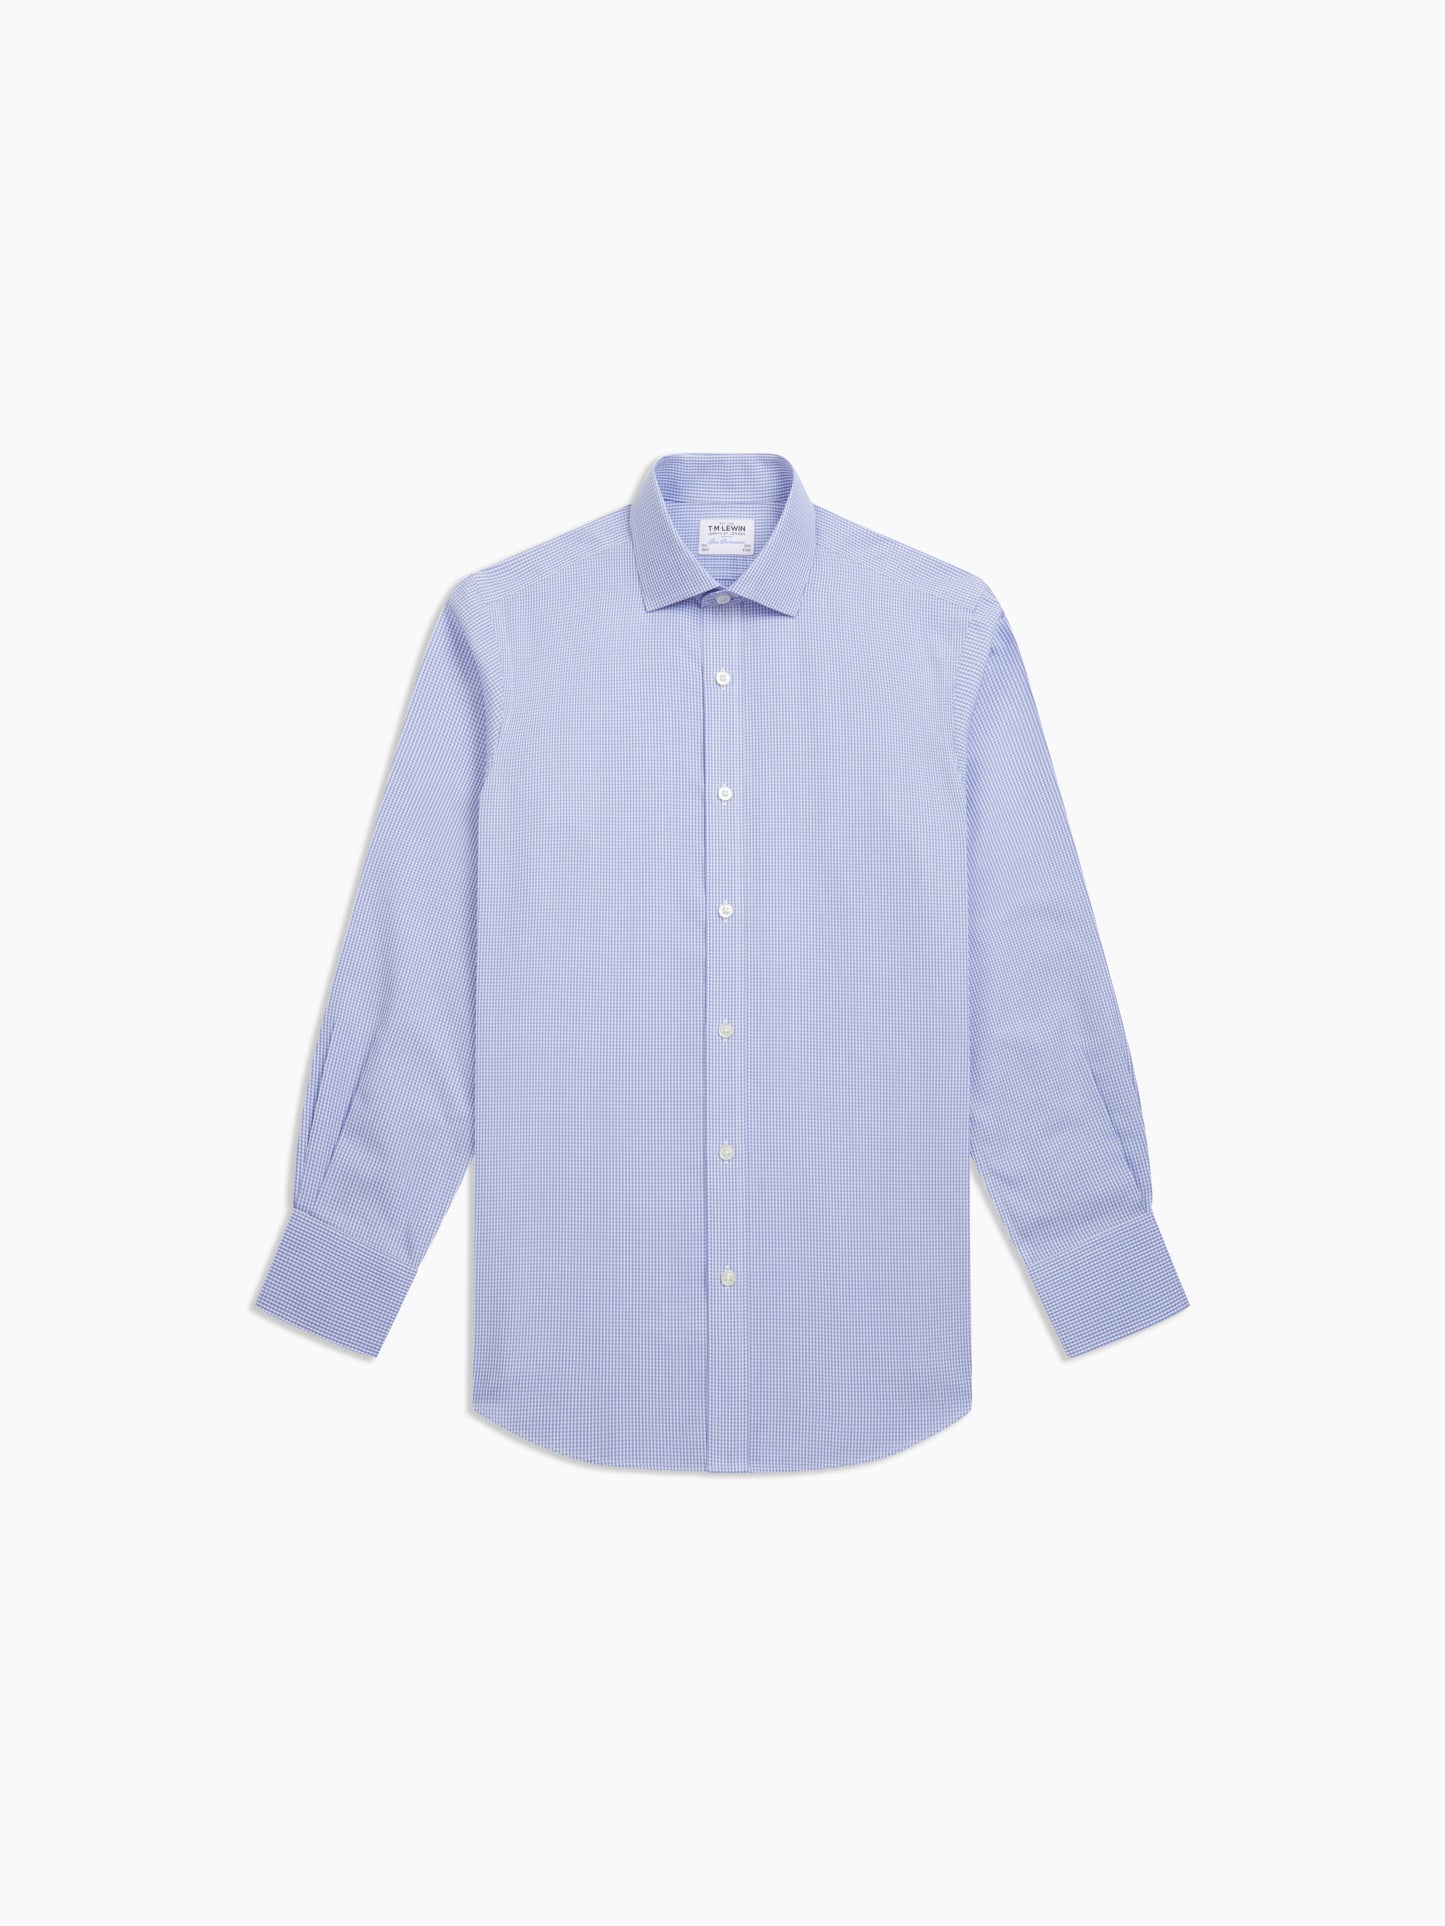 Image 2 of Non-Iron Light Blue Gingham Dobby Fitted Single Cuff Classic Collar Shirt